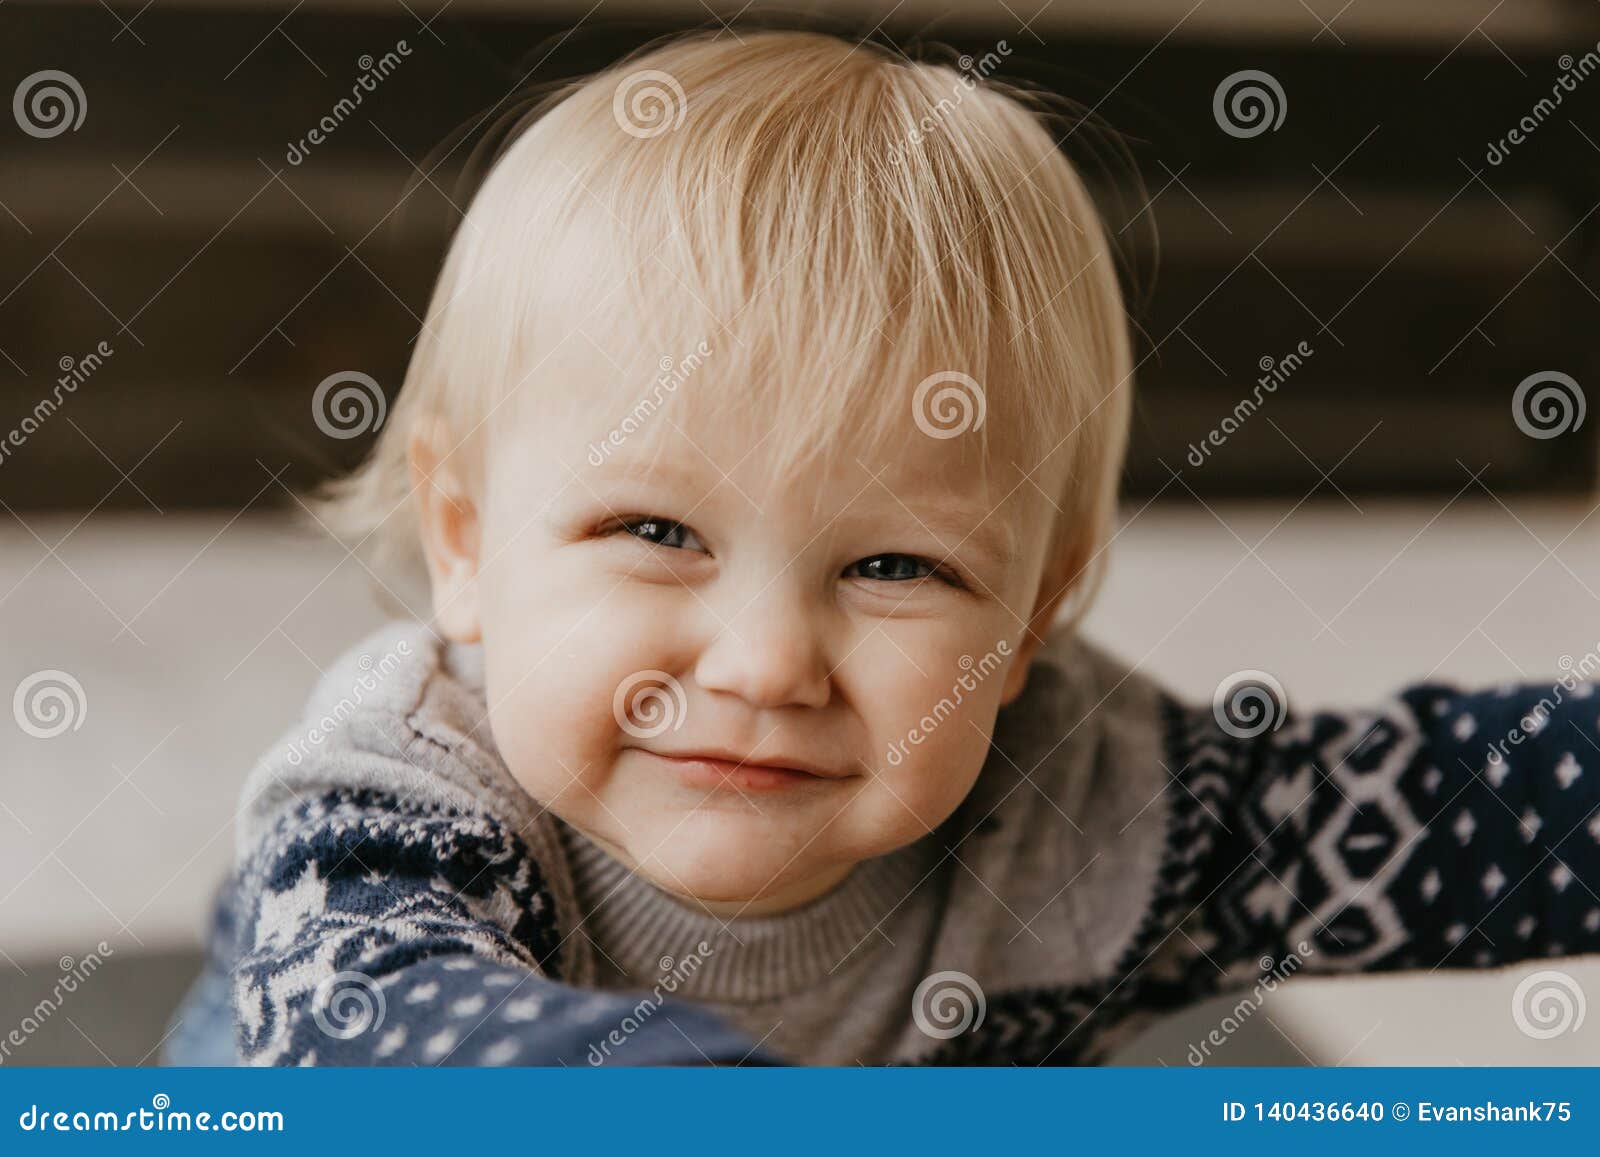 Download Cute Adorable Little Blonde Toddler Kid Laughing, Having ...